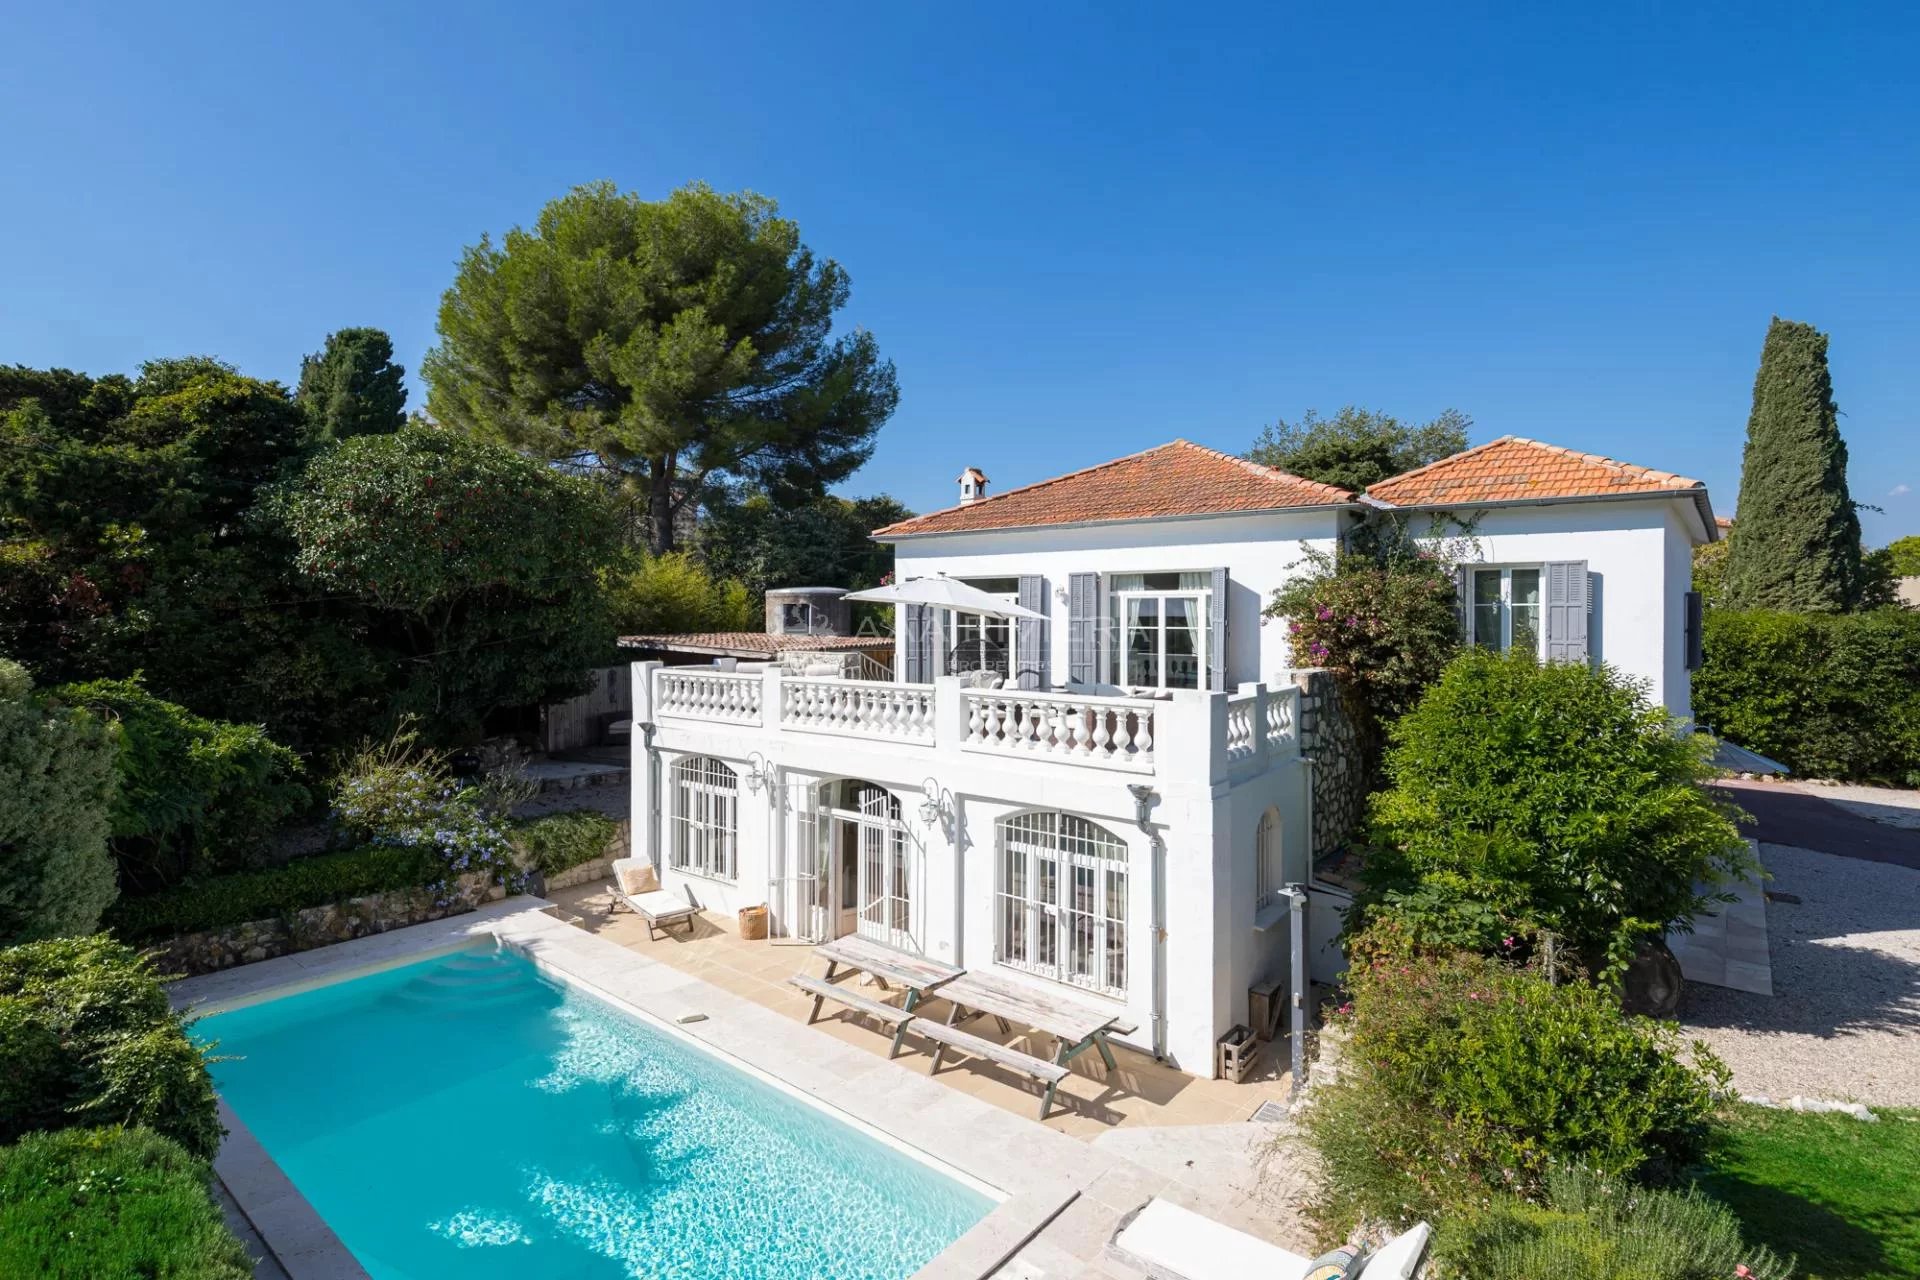 CAP D'ANTIBES - Elegant villa with 5 bedrooms, pool and open view - South facing